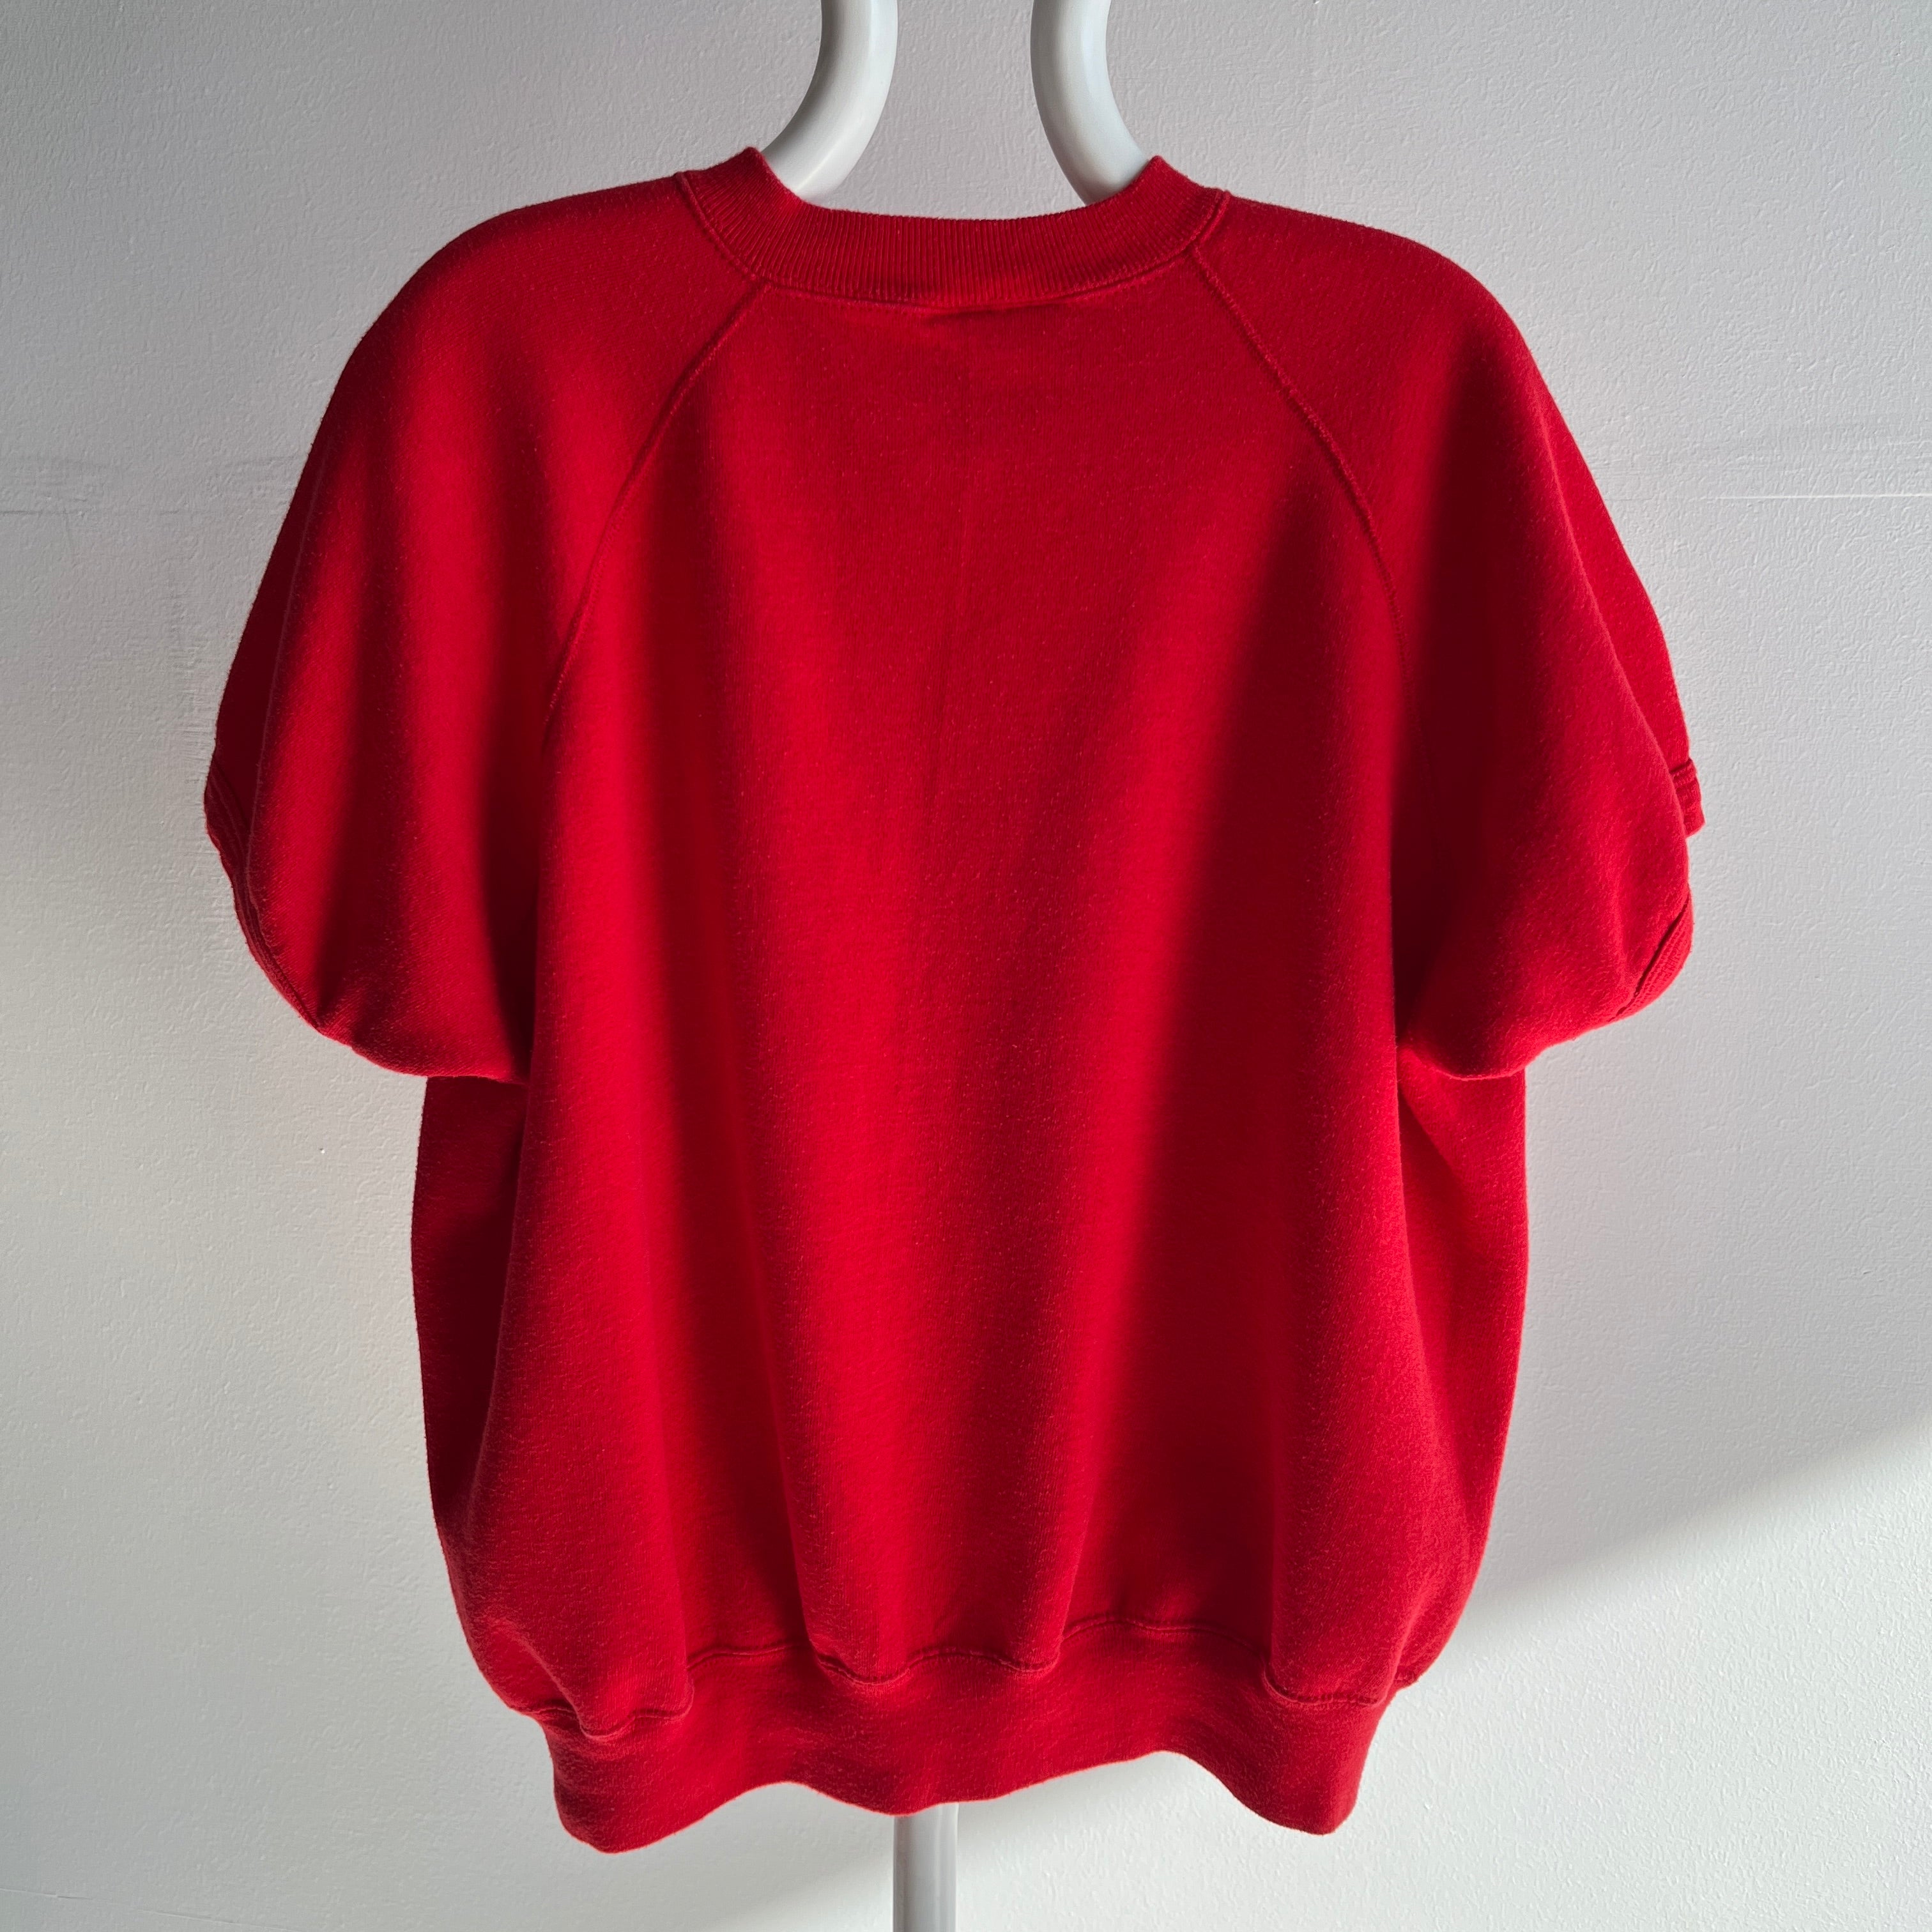 1980s Luxuriously Soft Lipstick Red Warm Up - Swoon